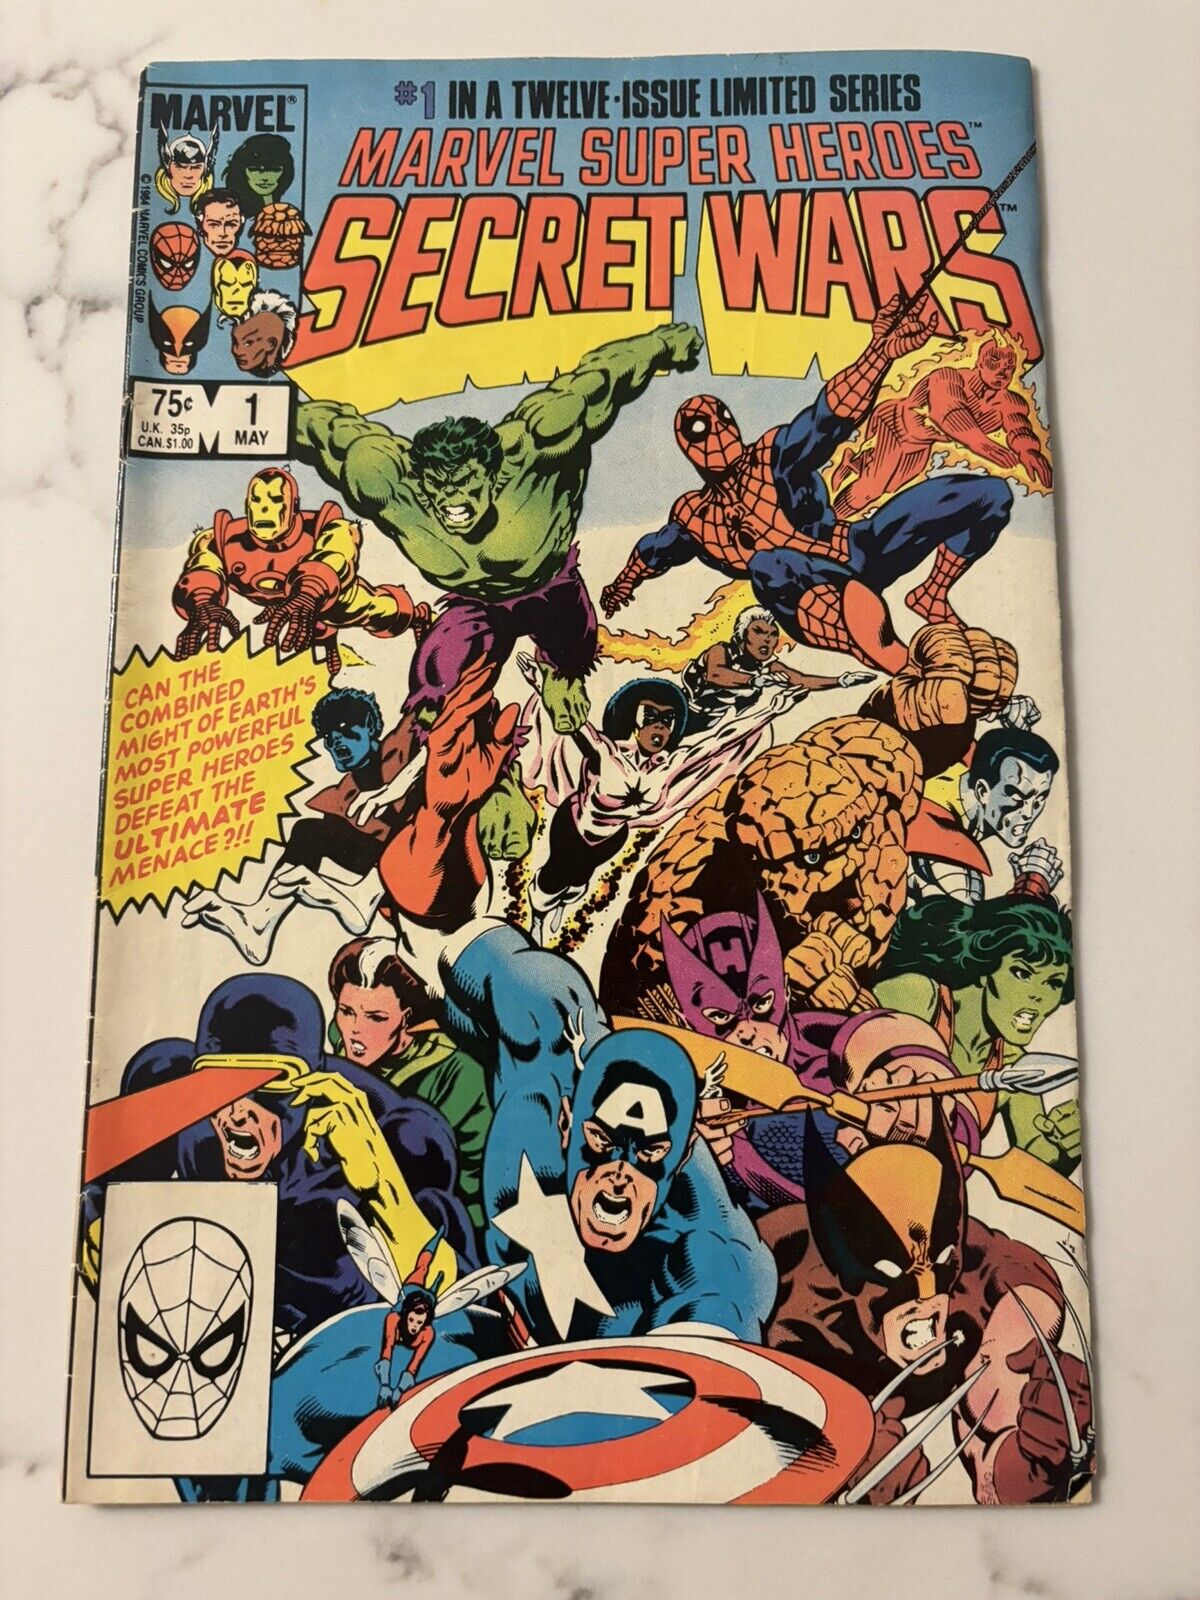 Marvel Super Heroes SECRET WARS #1 (1984) Classic Cover - Pre-Owned